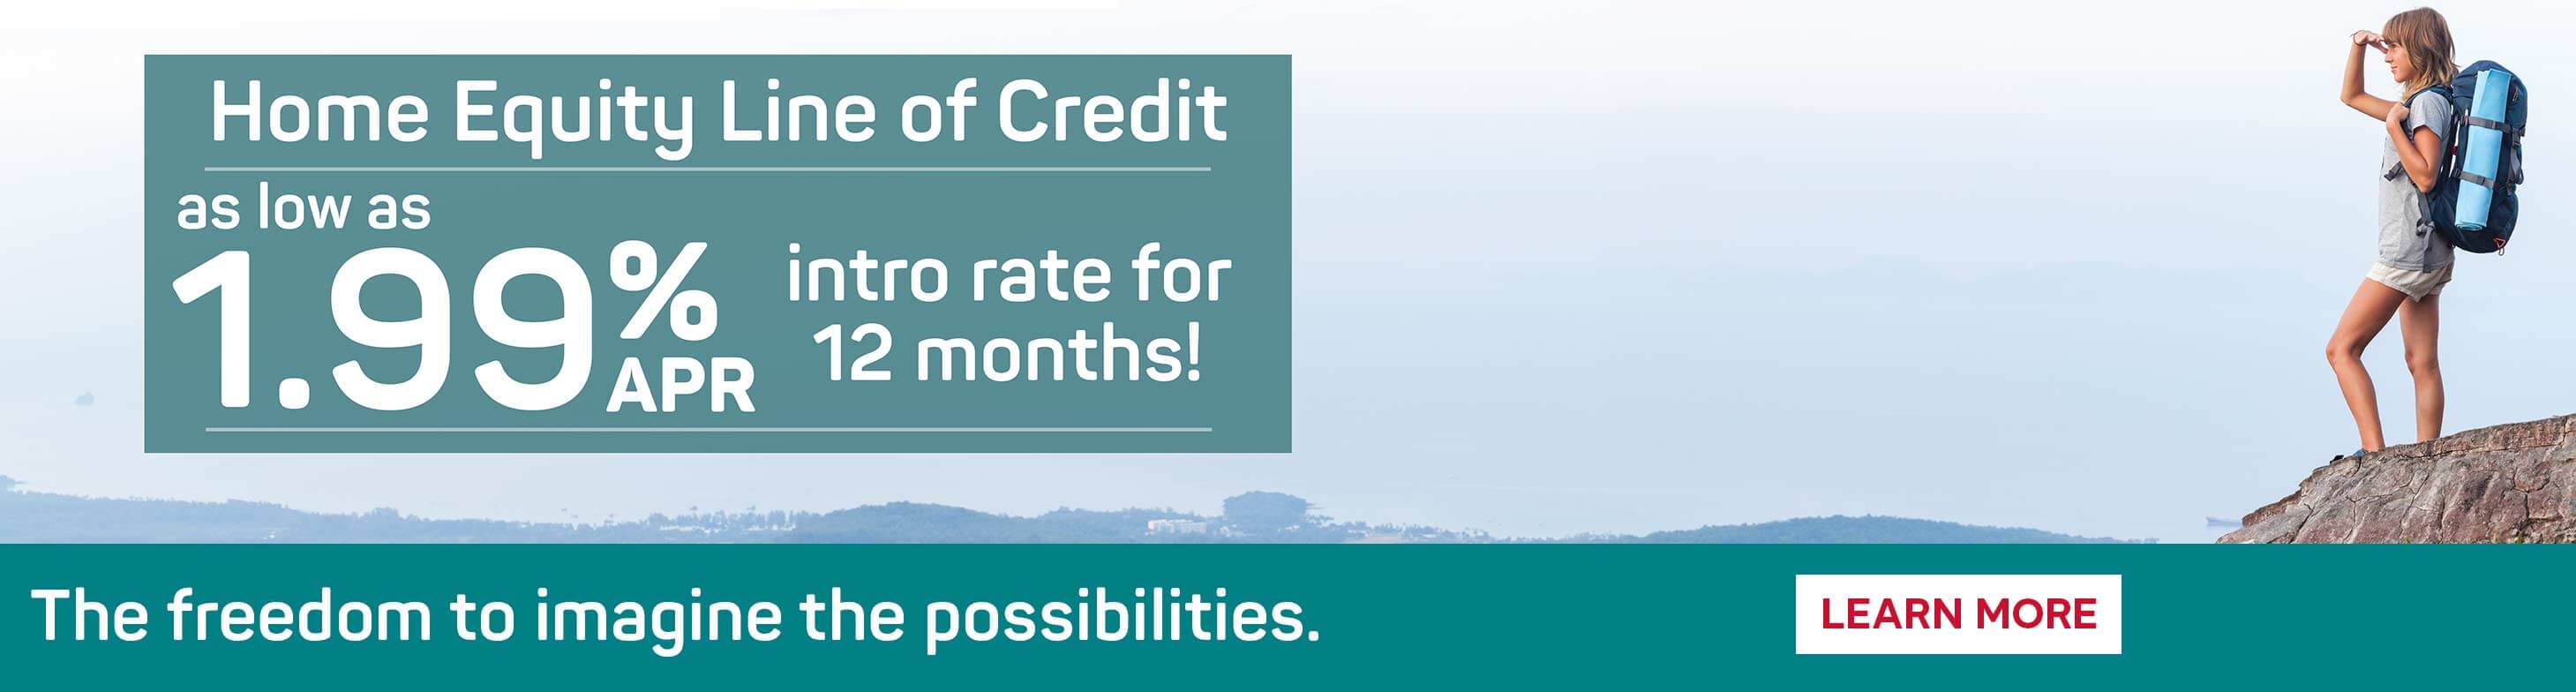 Imagine the possibilities. Home Equity Line of Credit as low as 1.99% APR into rate for 12 months!